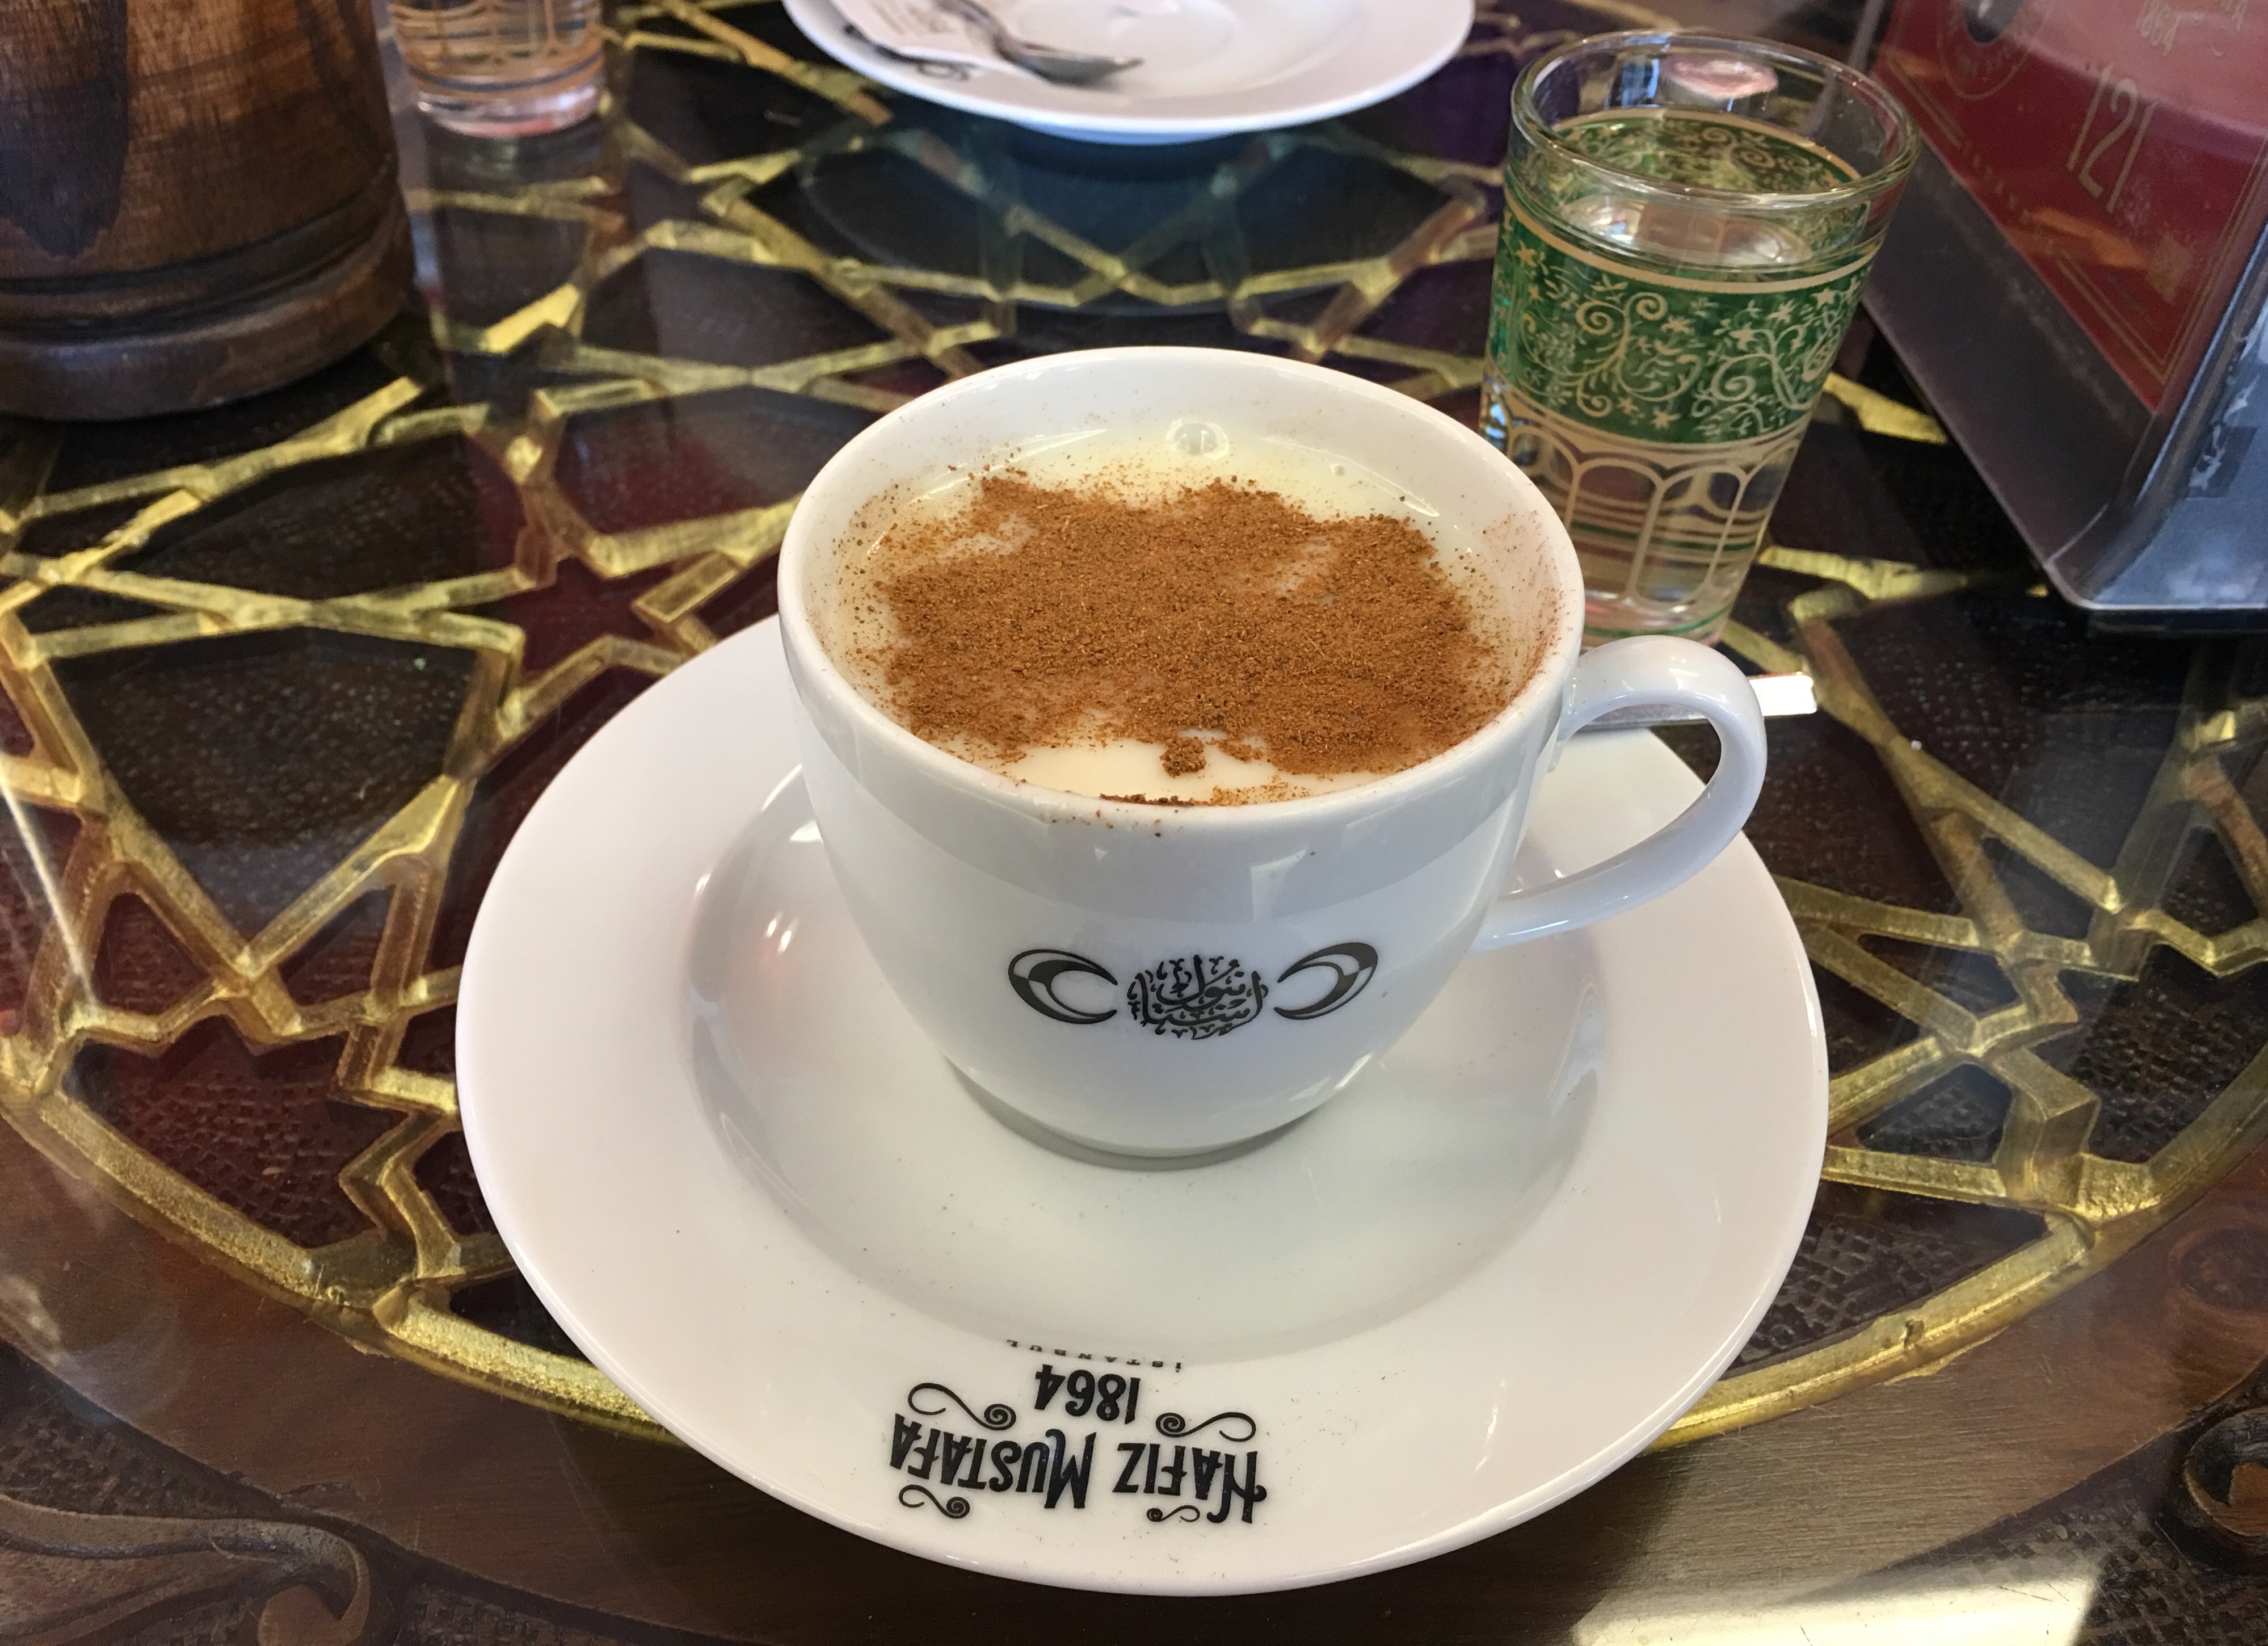 Turkish Salep Recipe: This Hot Milk Recipe With Cinnamon Will Warm You Up, Beverages